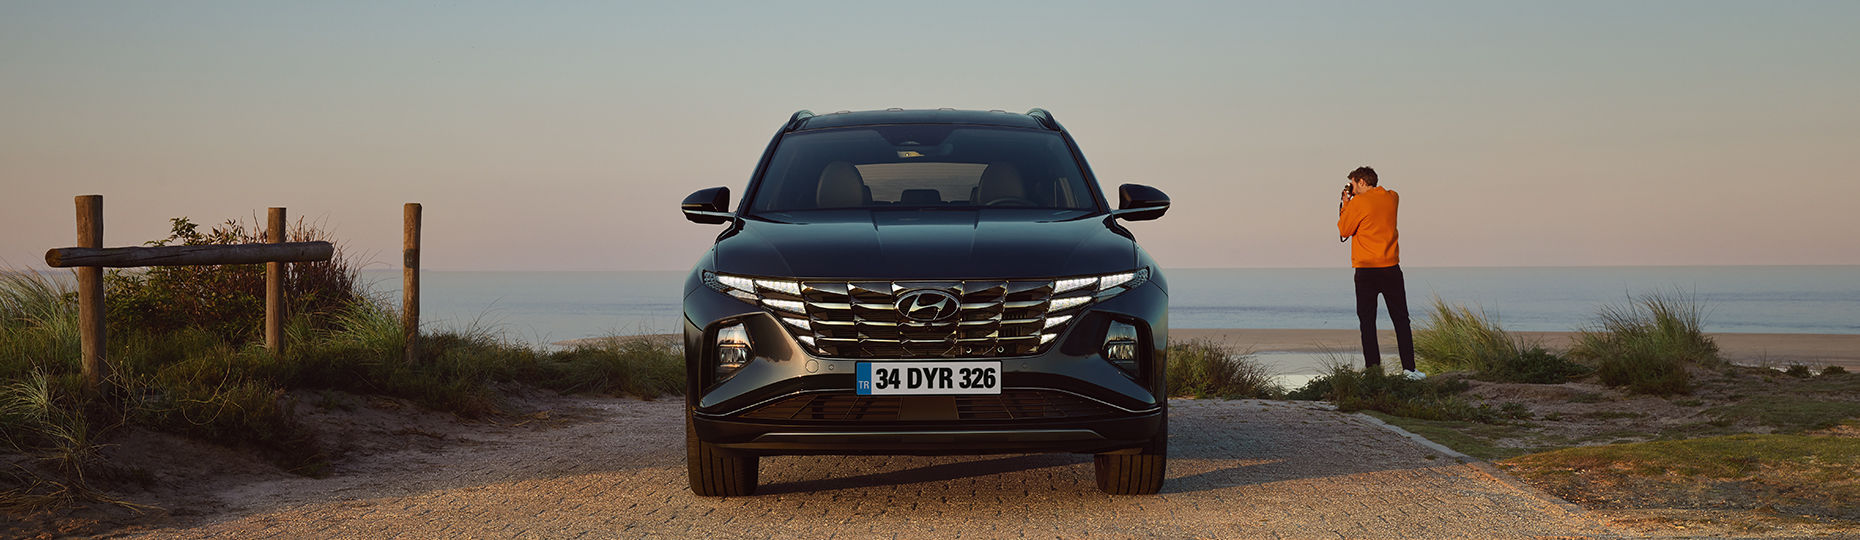 The all-new TUCSON highlights key visual